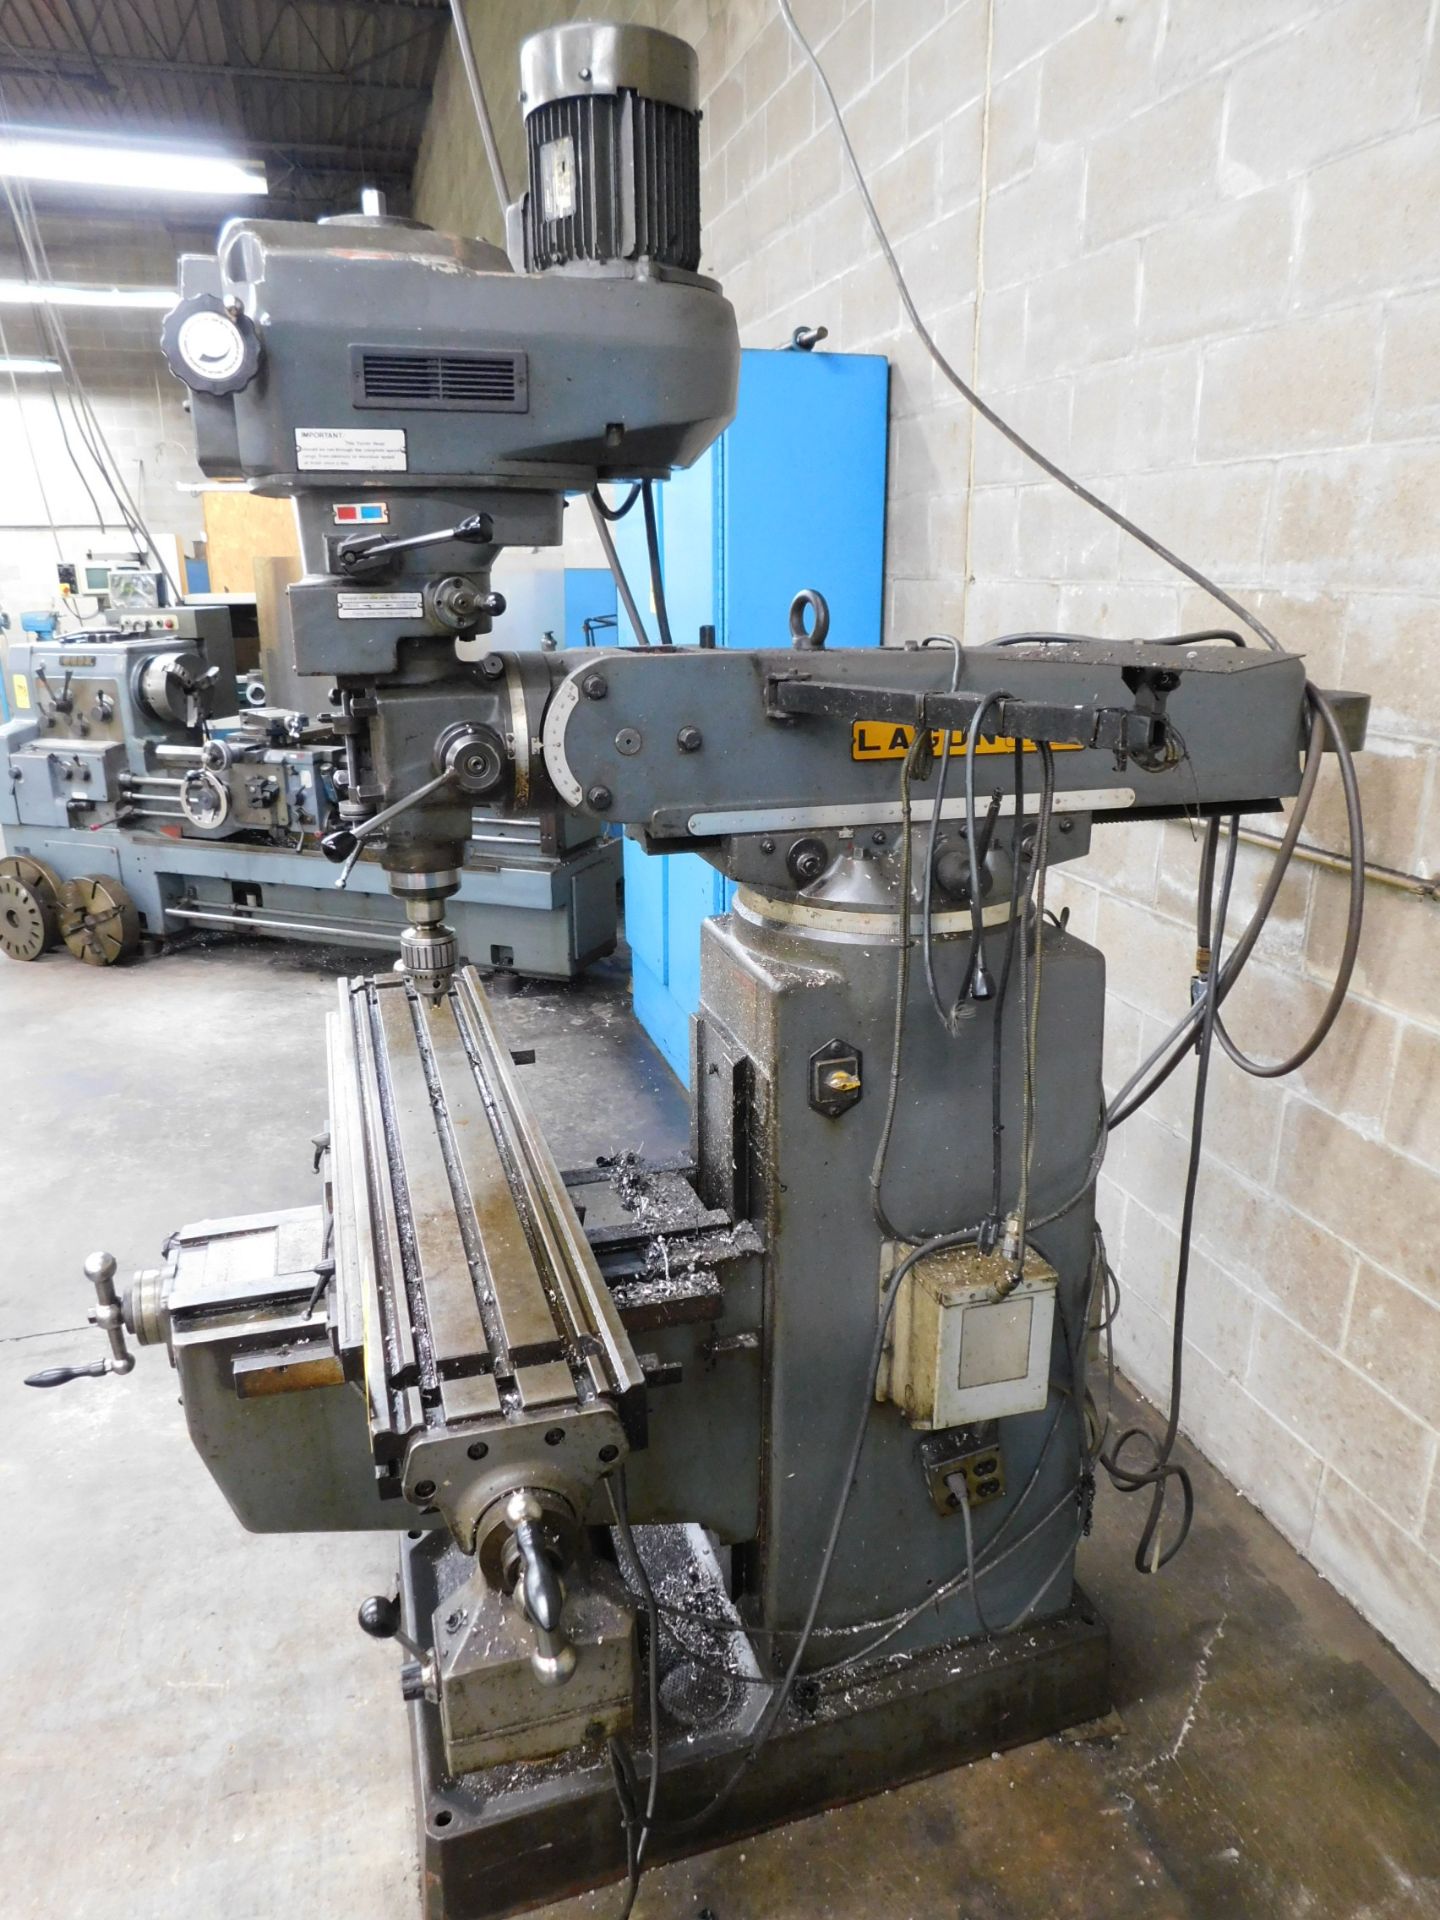 Lagun Model FTV-2 Vertical Mill, s/n SE17835, Variable Speed, 3 HP, R-8 Spindle, 9” X 48” Table, - Image 10 of 11